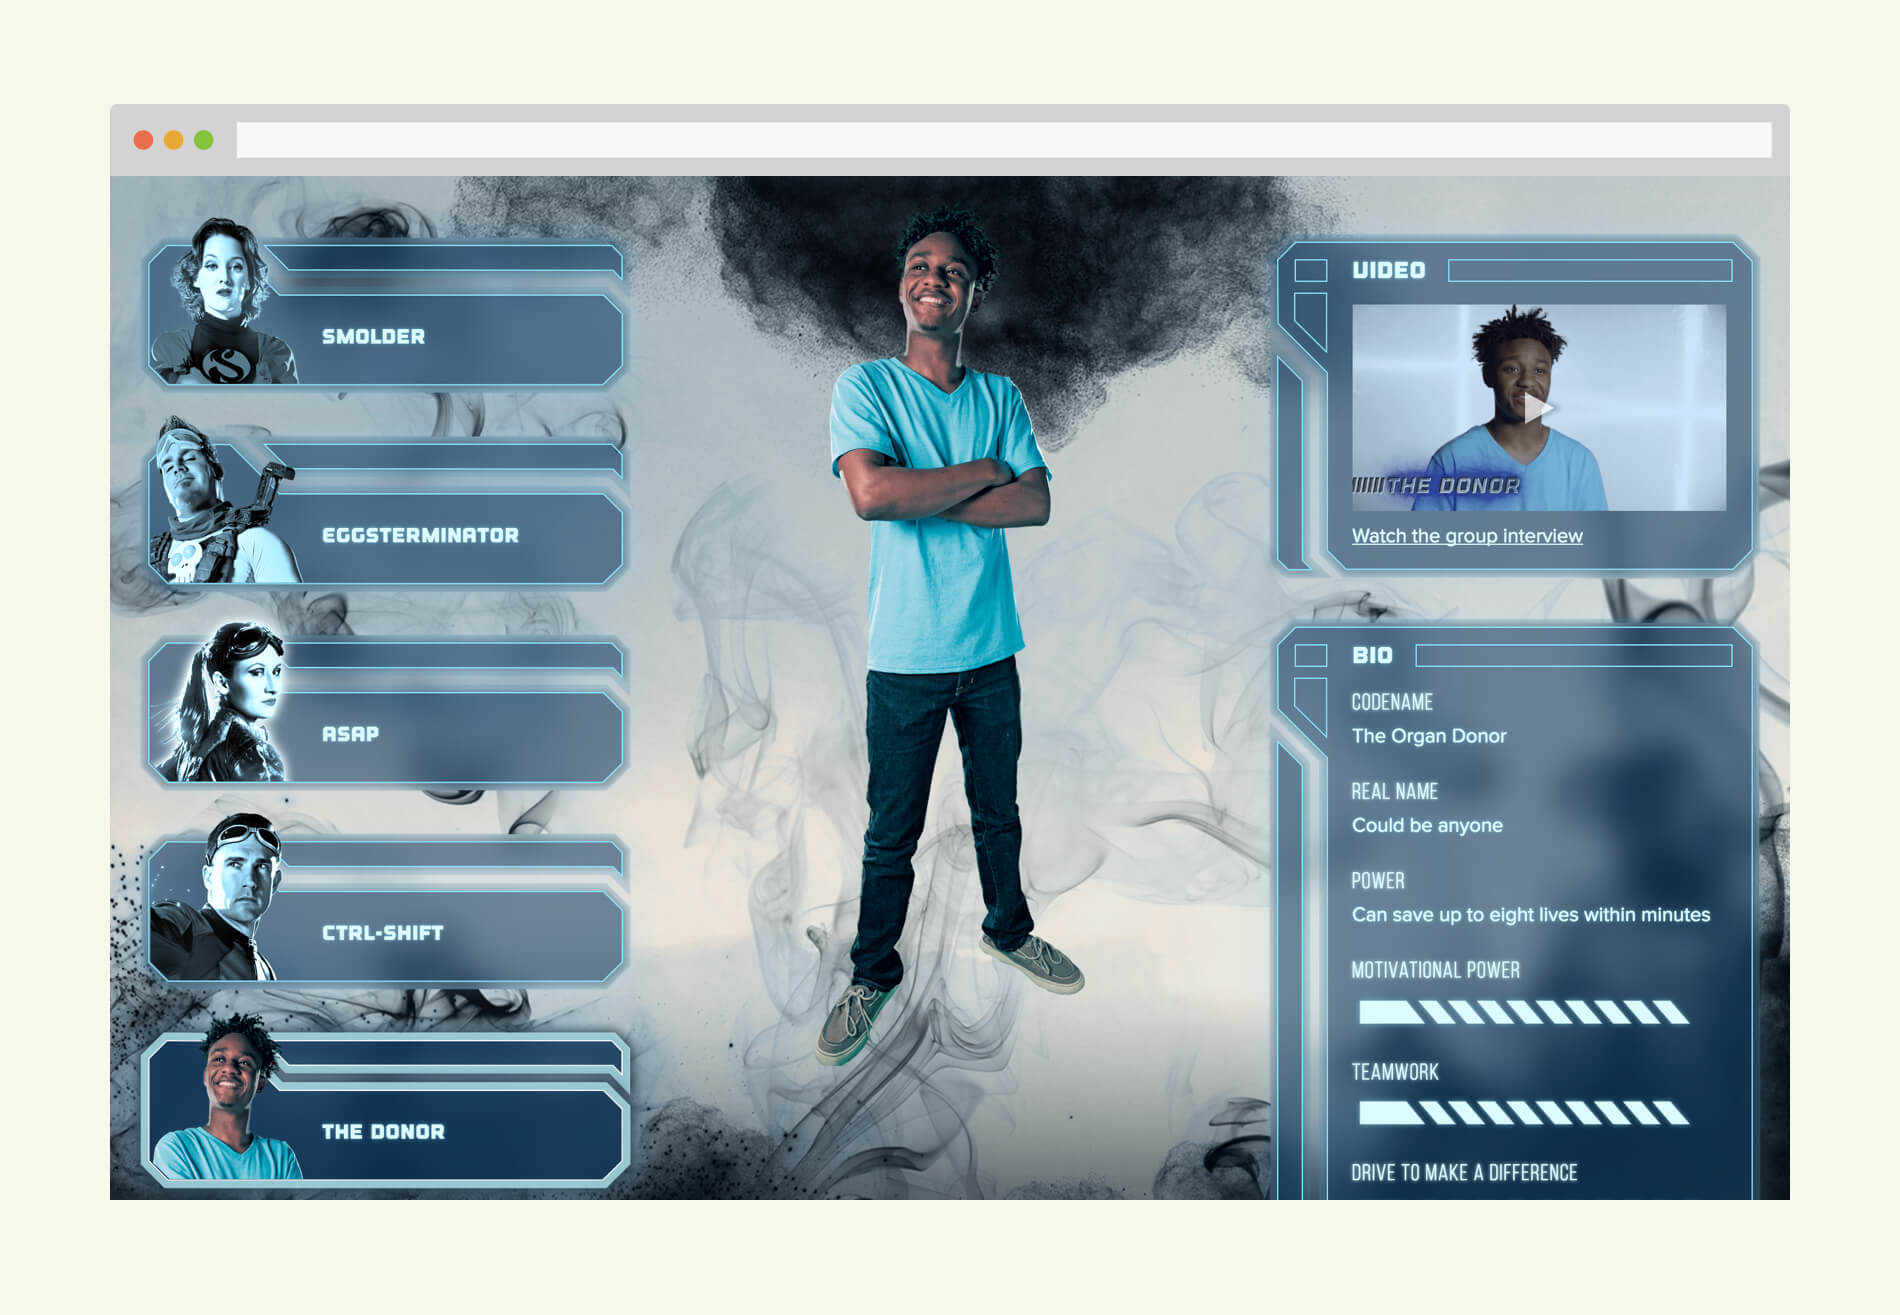 League of Lifesavers page showing one of the heros, The Donor, who looks like an ordinary young adult wearing a tee shirt and jeans. Shows art, video thumbnail, and accompanying backstory.